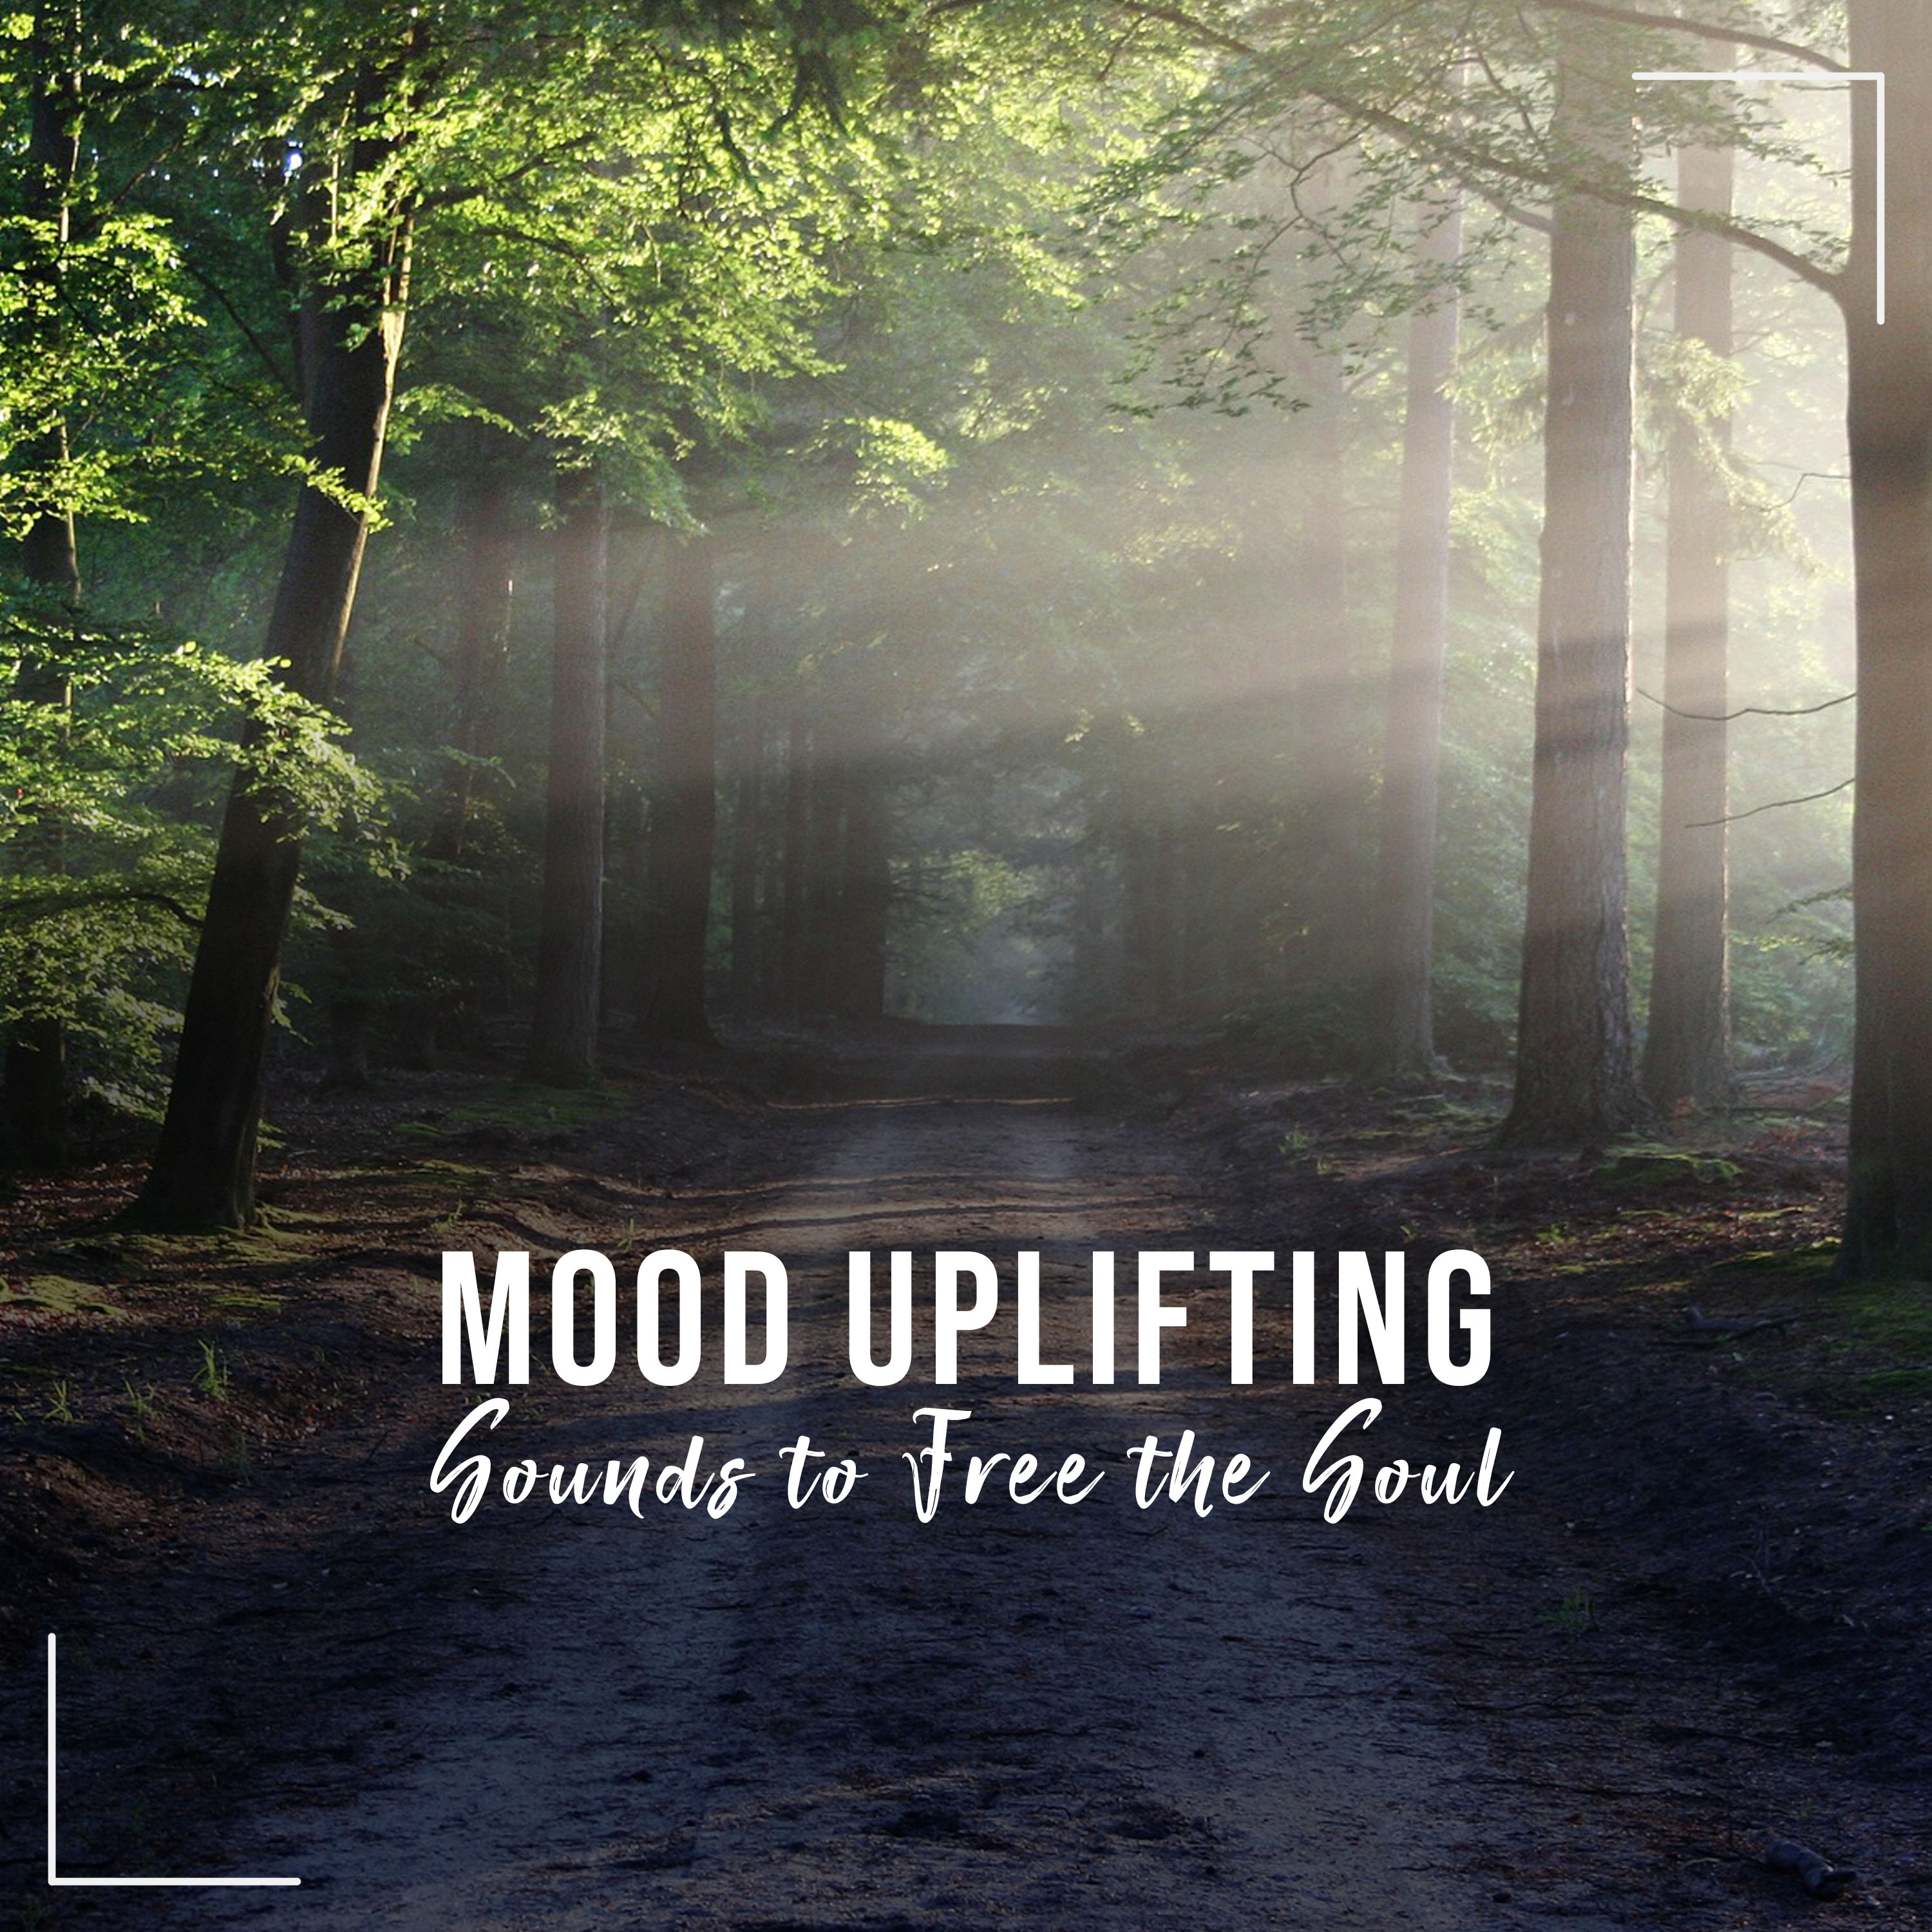 20 Mood Uplifting Sounds to Free the Soul